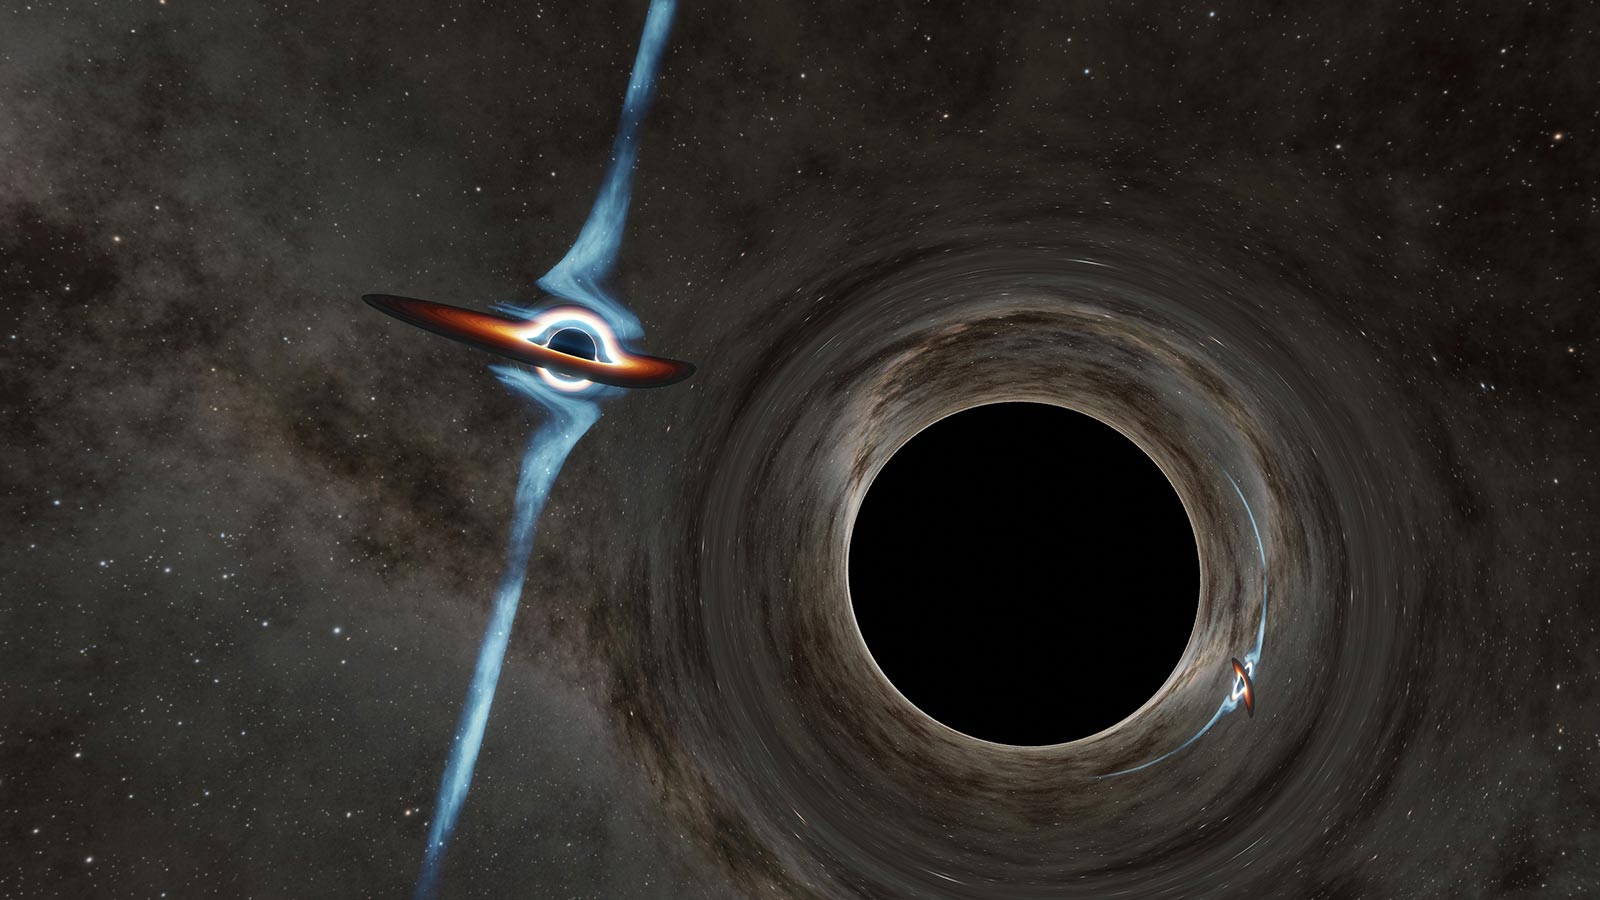 Doomed To Collide: Astronomers Announce Discovery of Supermassive Binary Black Holes - SciTechDaily